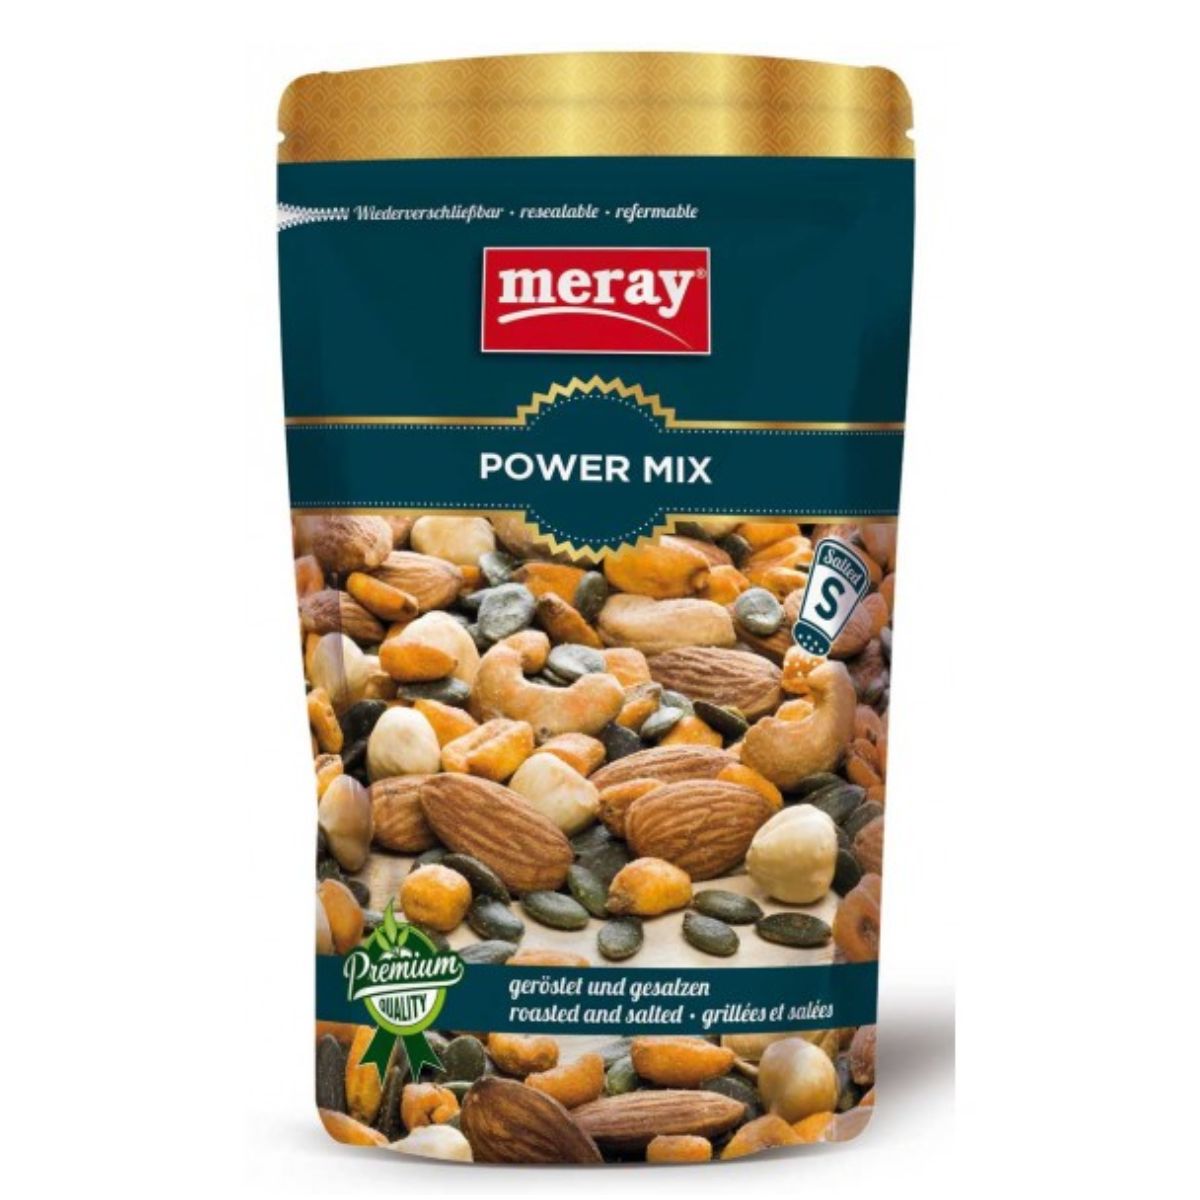 A package of Meray - Power Mix Nuts - 150g featuring a nutritious blend of roasted and salted nuts and seeds, perfect for on-the-go snacking with a convenient resealable top.